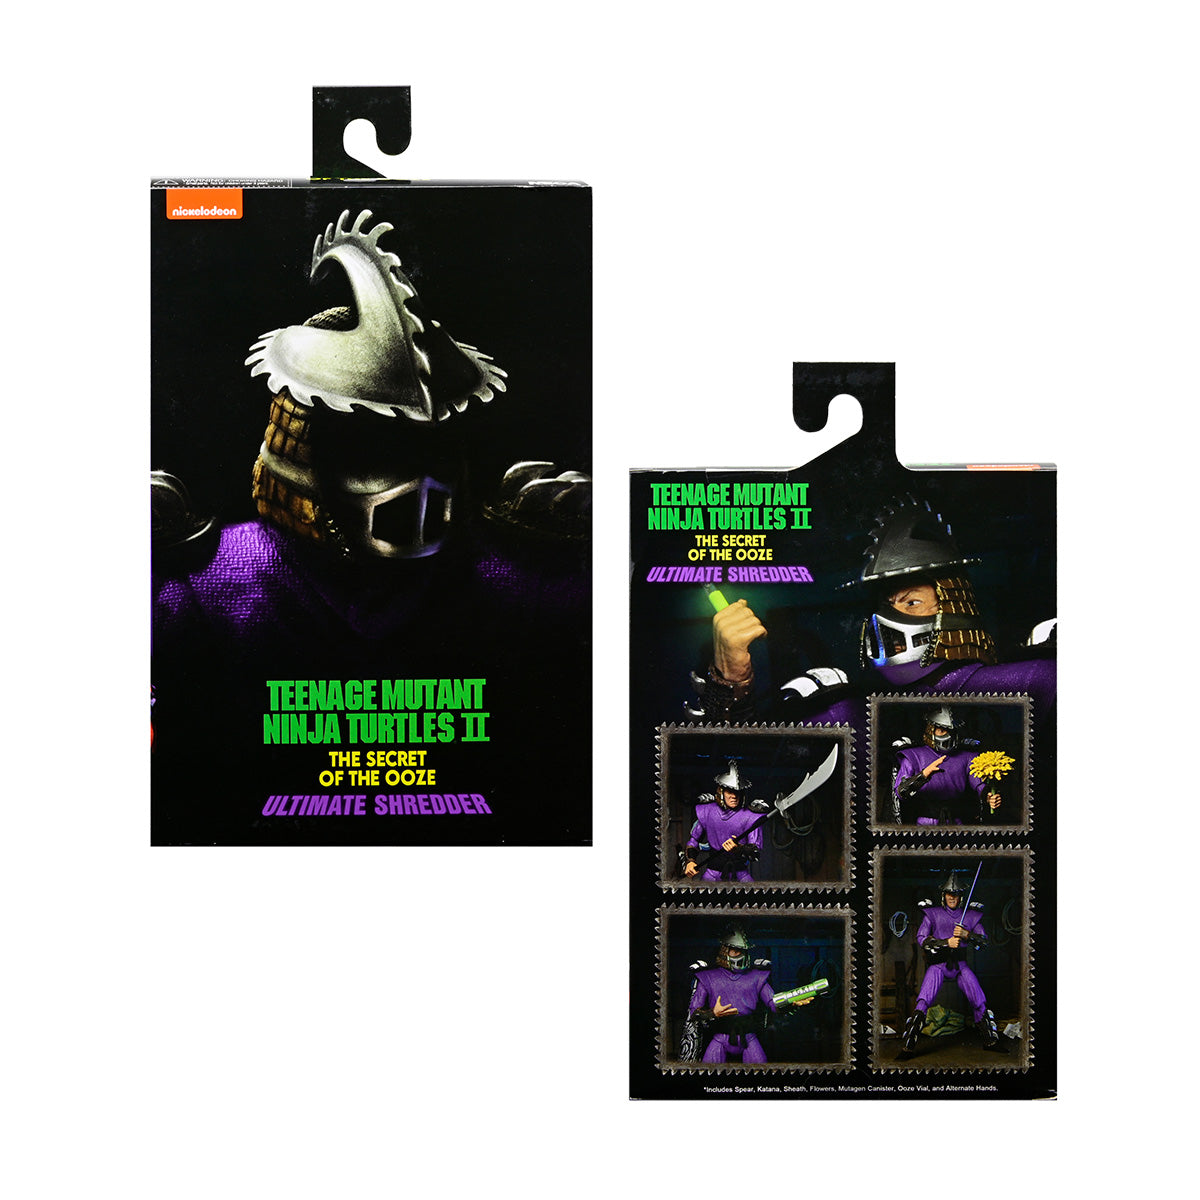 Teenage Mutant Ninja Turtles II: The Secret of the Ooze - Ultimate Shredder 7” Scale Action Figure packaging front and back